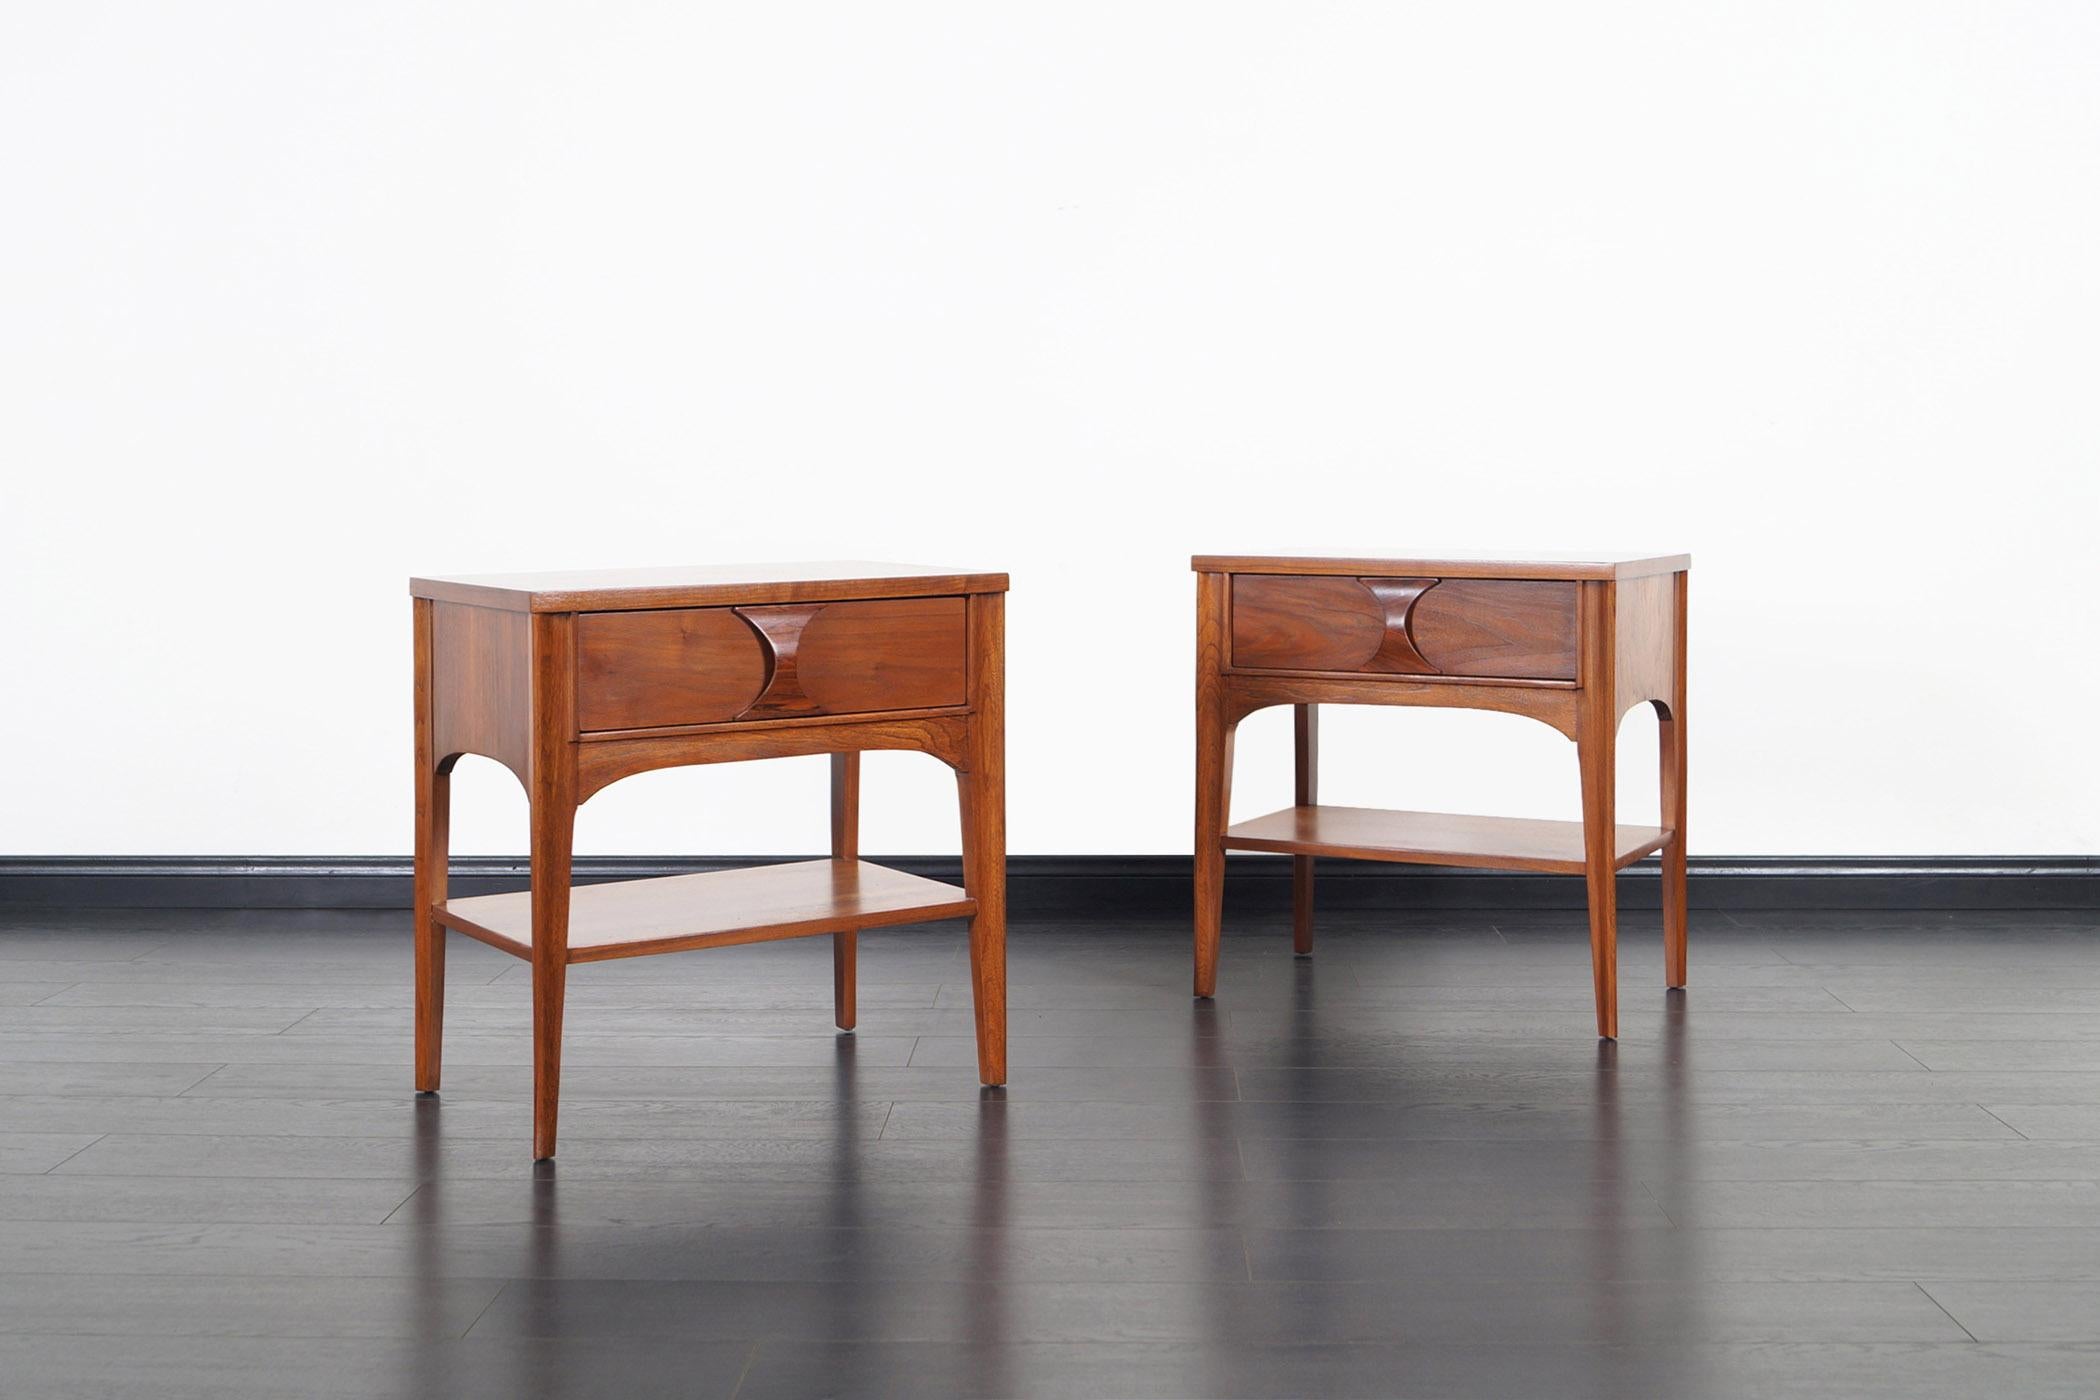 Midcentury walnut nightstands by Kent Coffey for the Perspecta series line. Each nightstand features a single dovetail drawer with a sculpted rosewood handle.